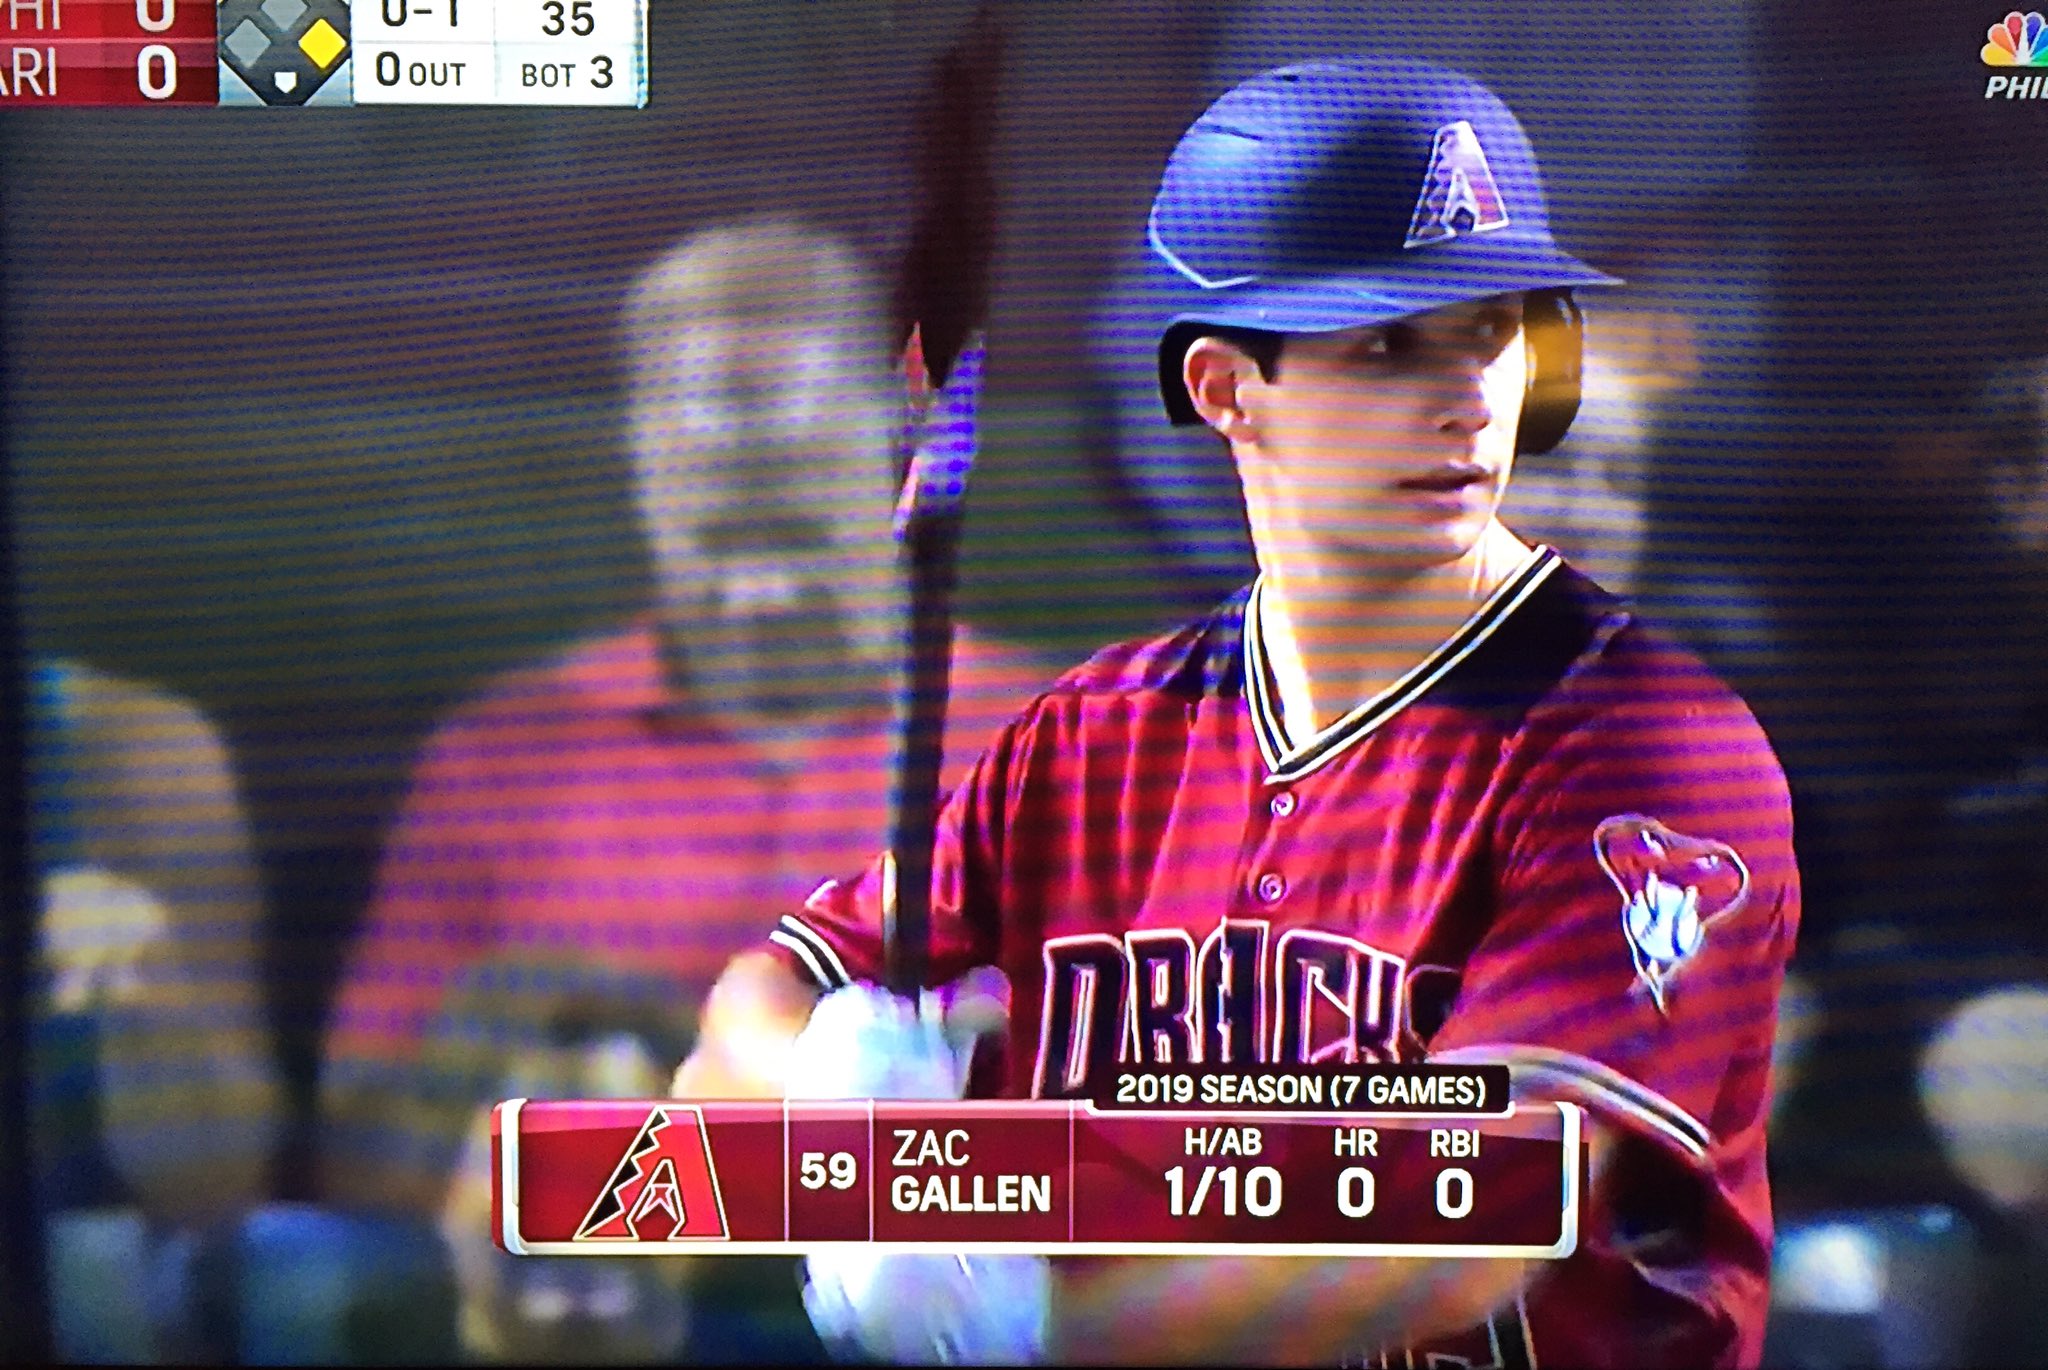 Frank McGuigan on X: @UniWatch @PhilHecken Zac Gallen pitches with glasses,  hits without.  / X